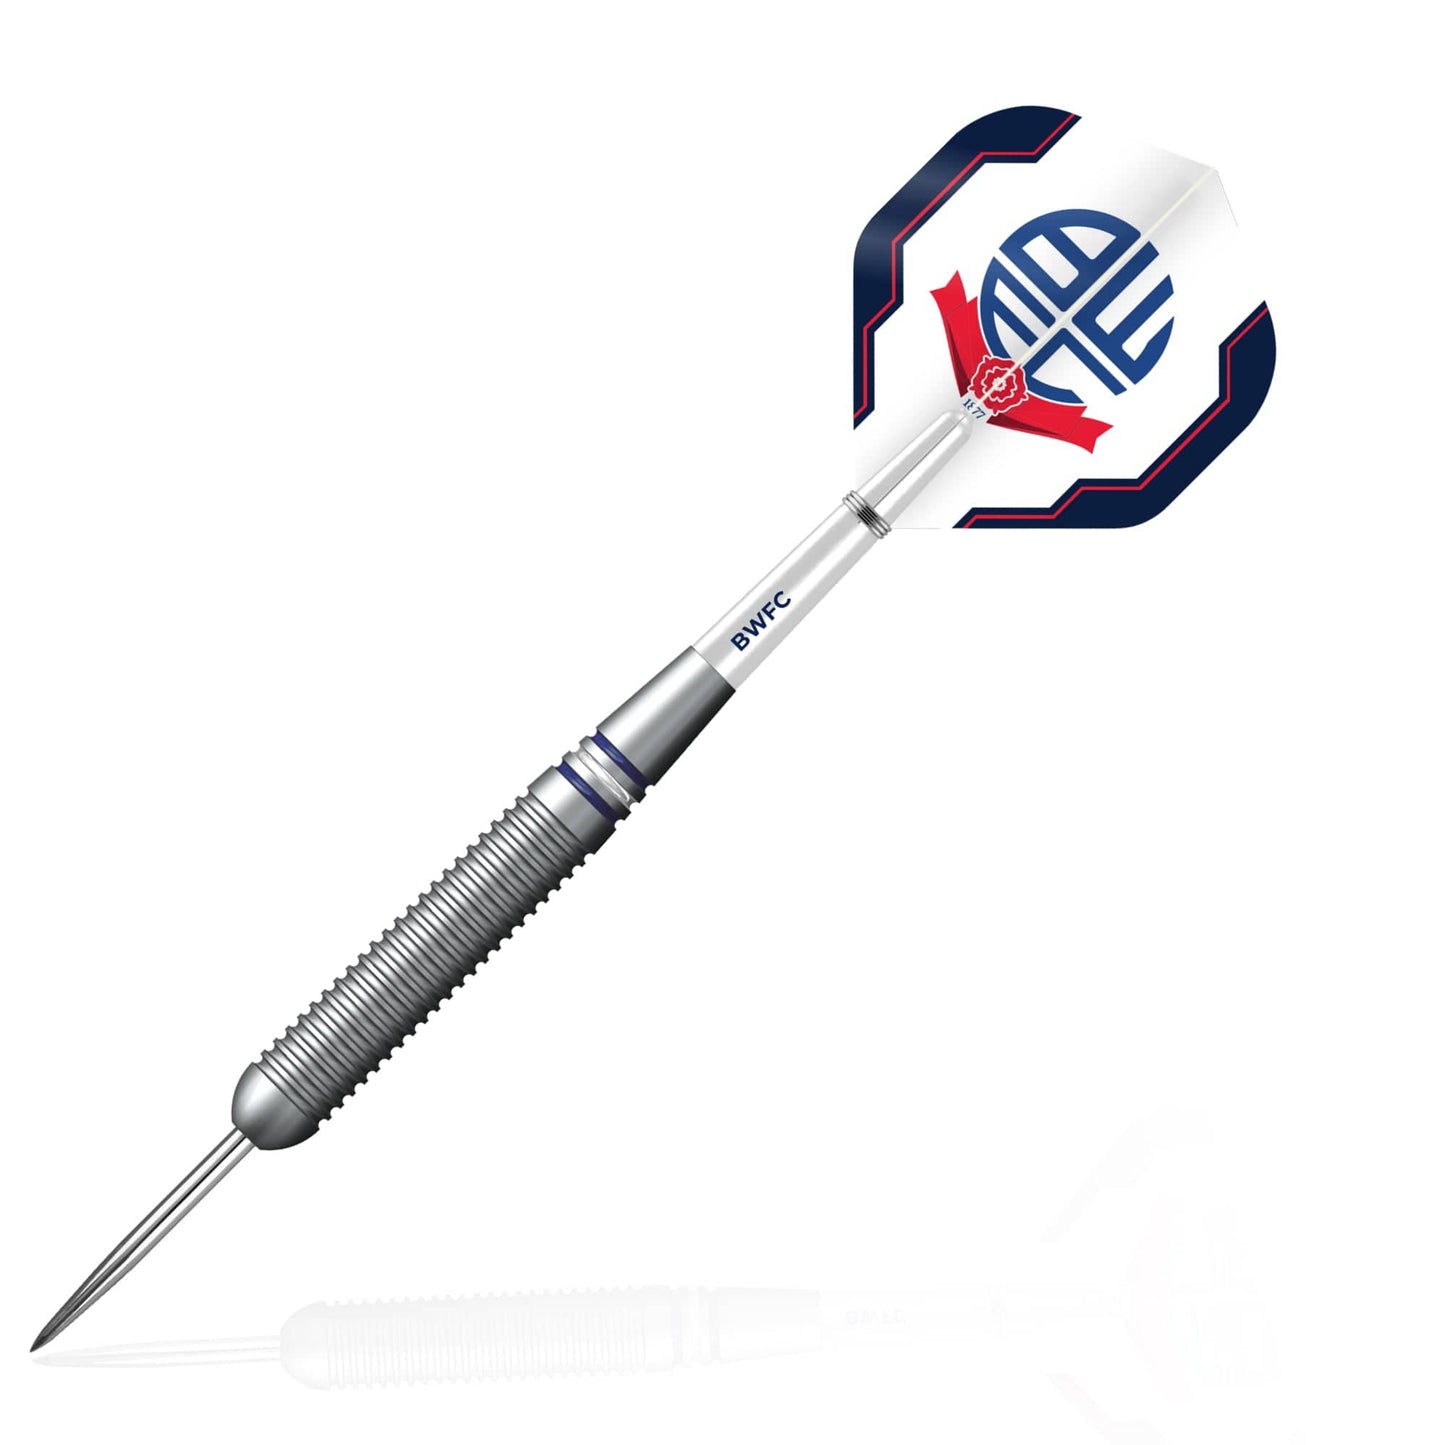 Bolton Wanderers Darts - Steel Tip Brass - Official Licensed - BWFC - 22g